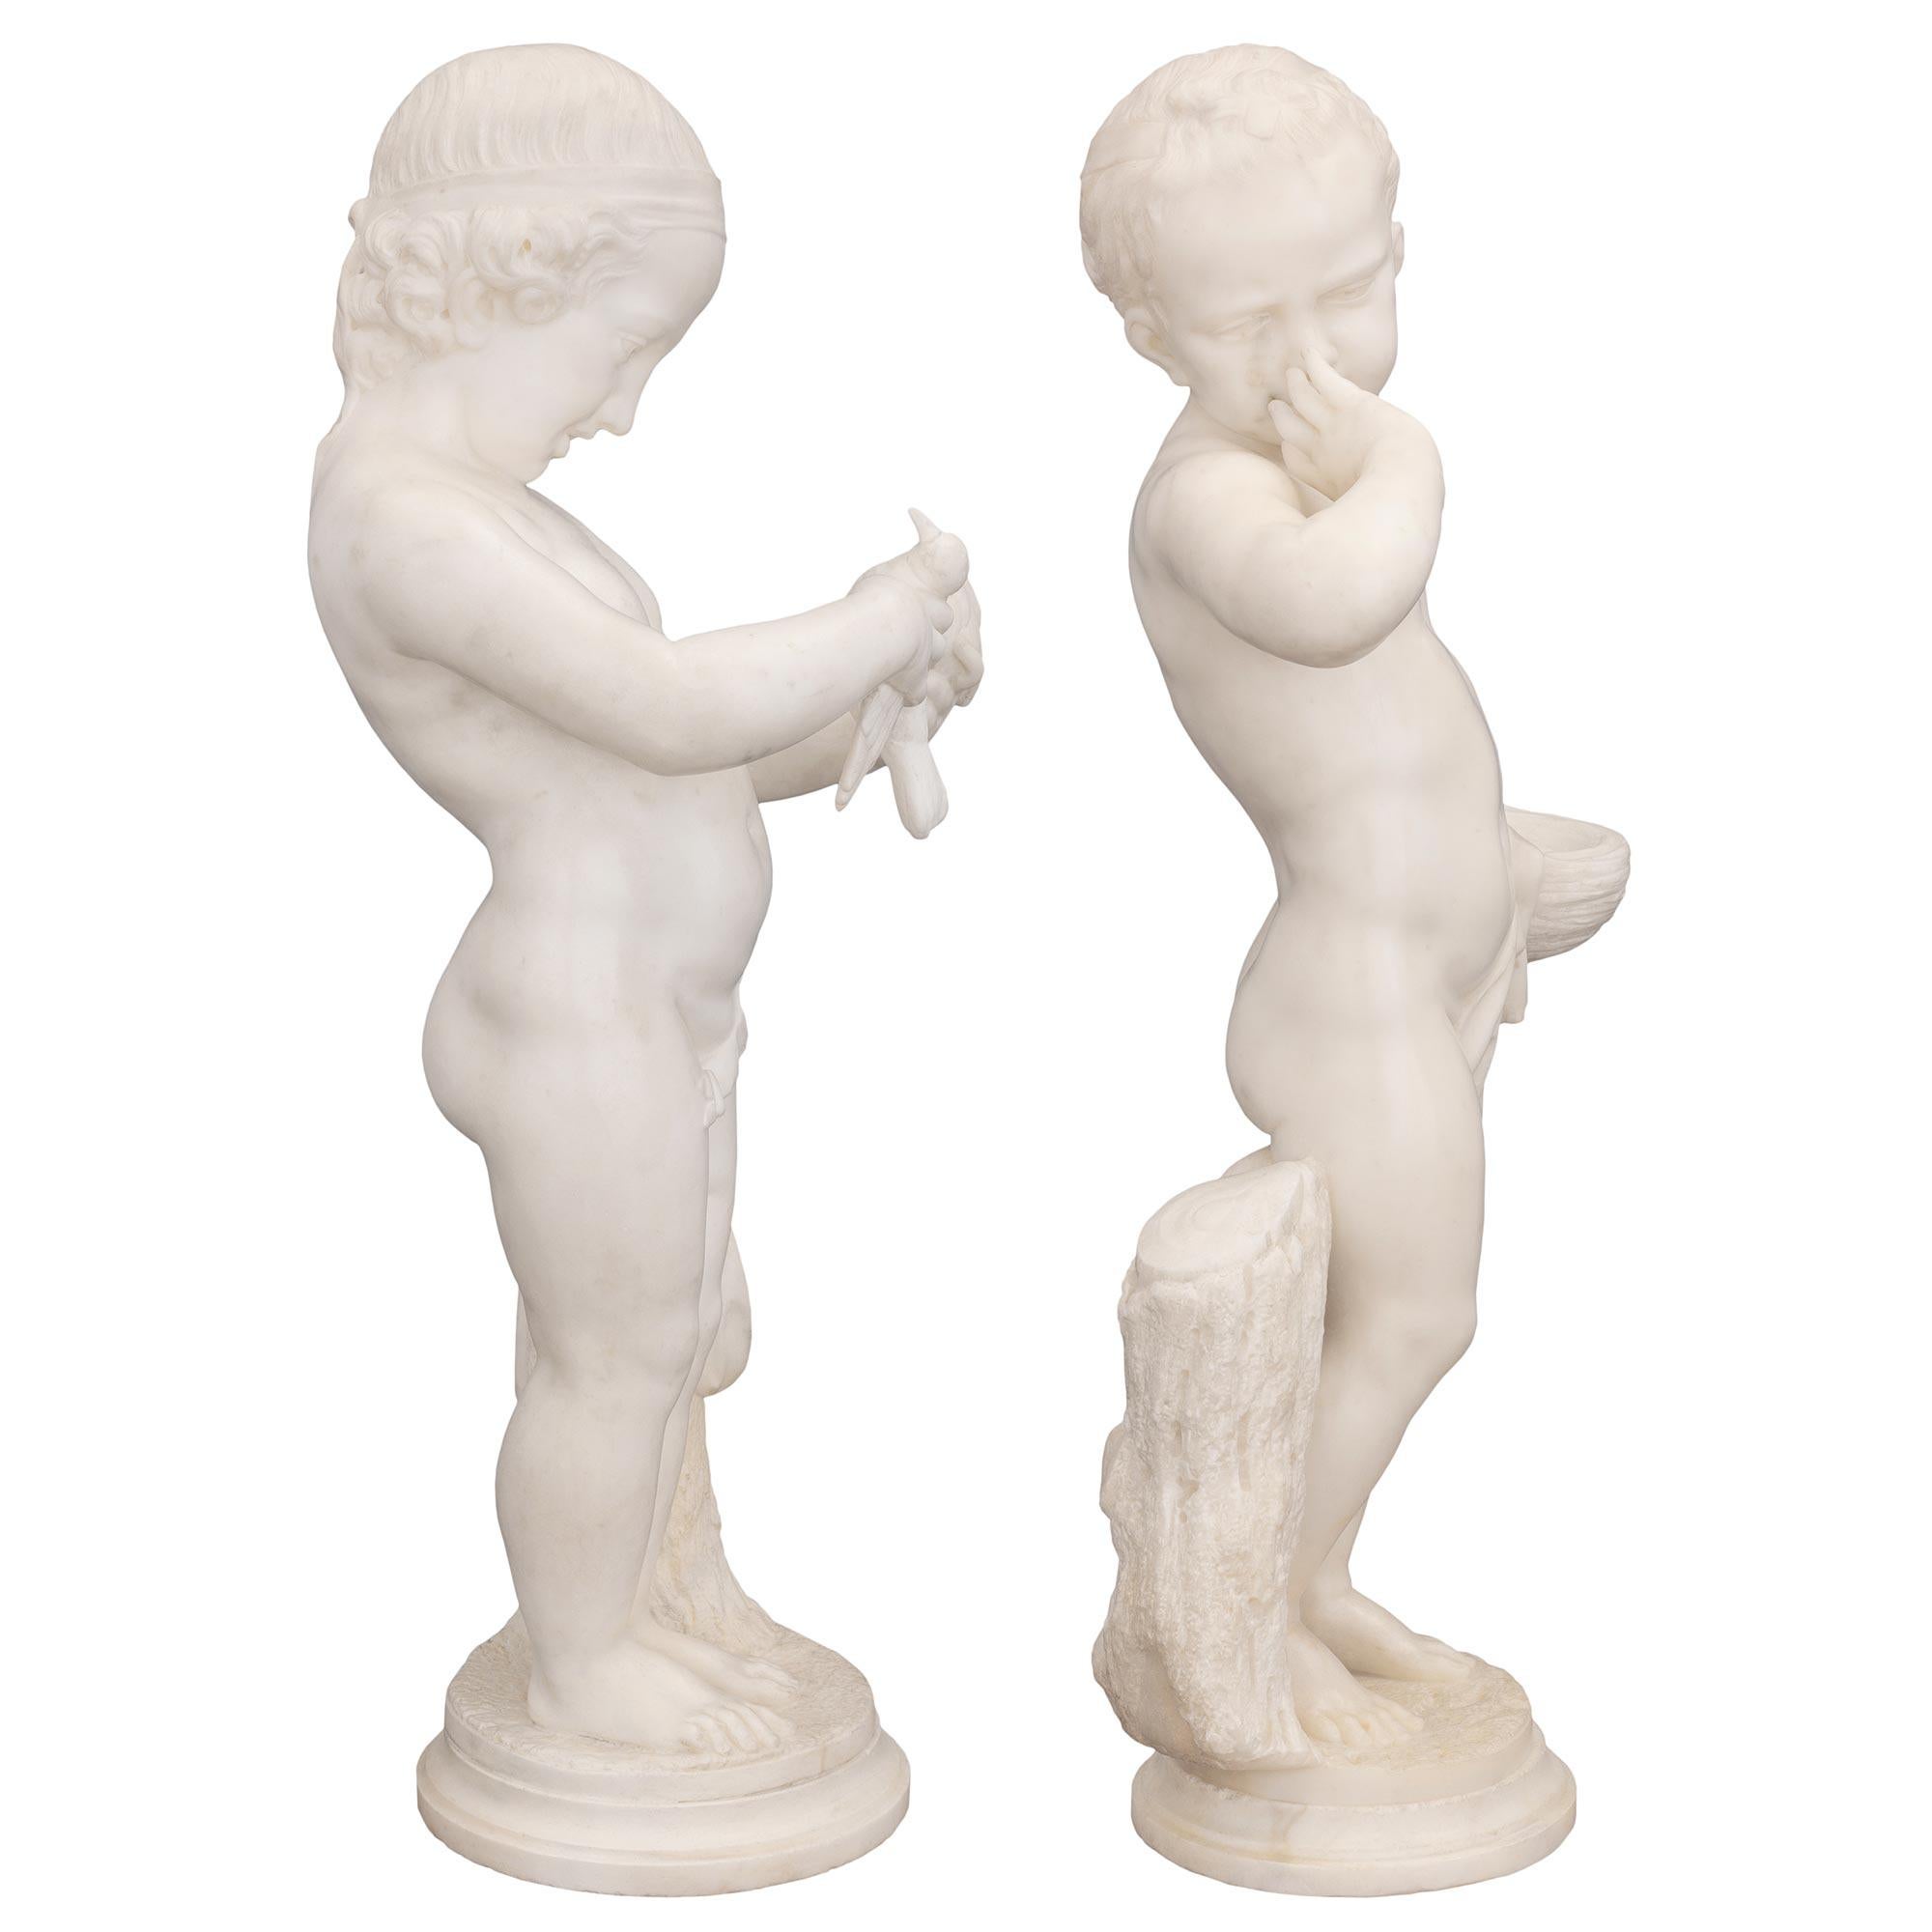 Pair of Italian 19th Century White Carrara Marble Statues In Good Condition For Sale In West Palm Beach, FL